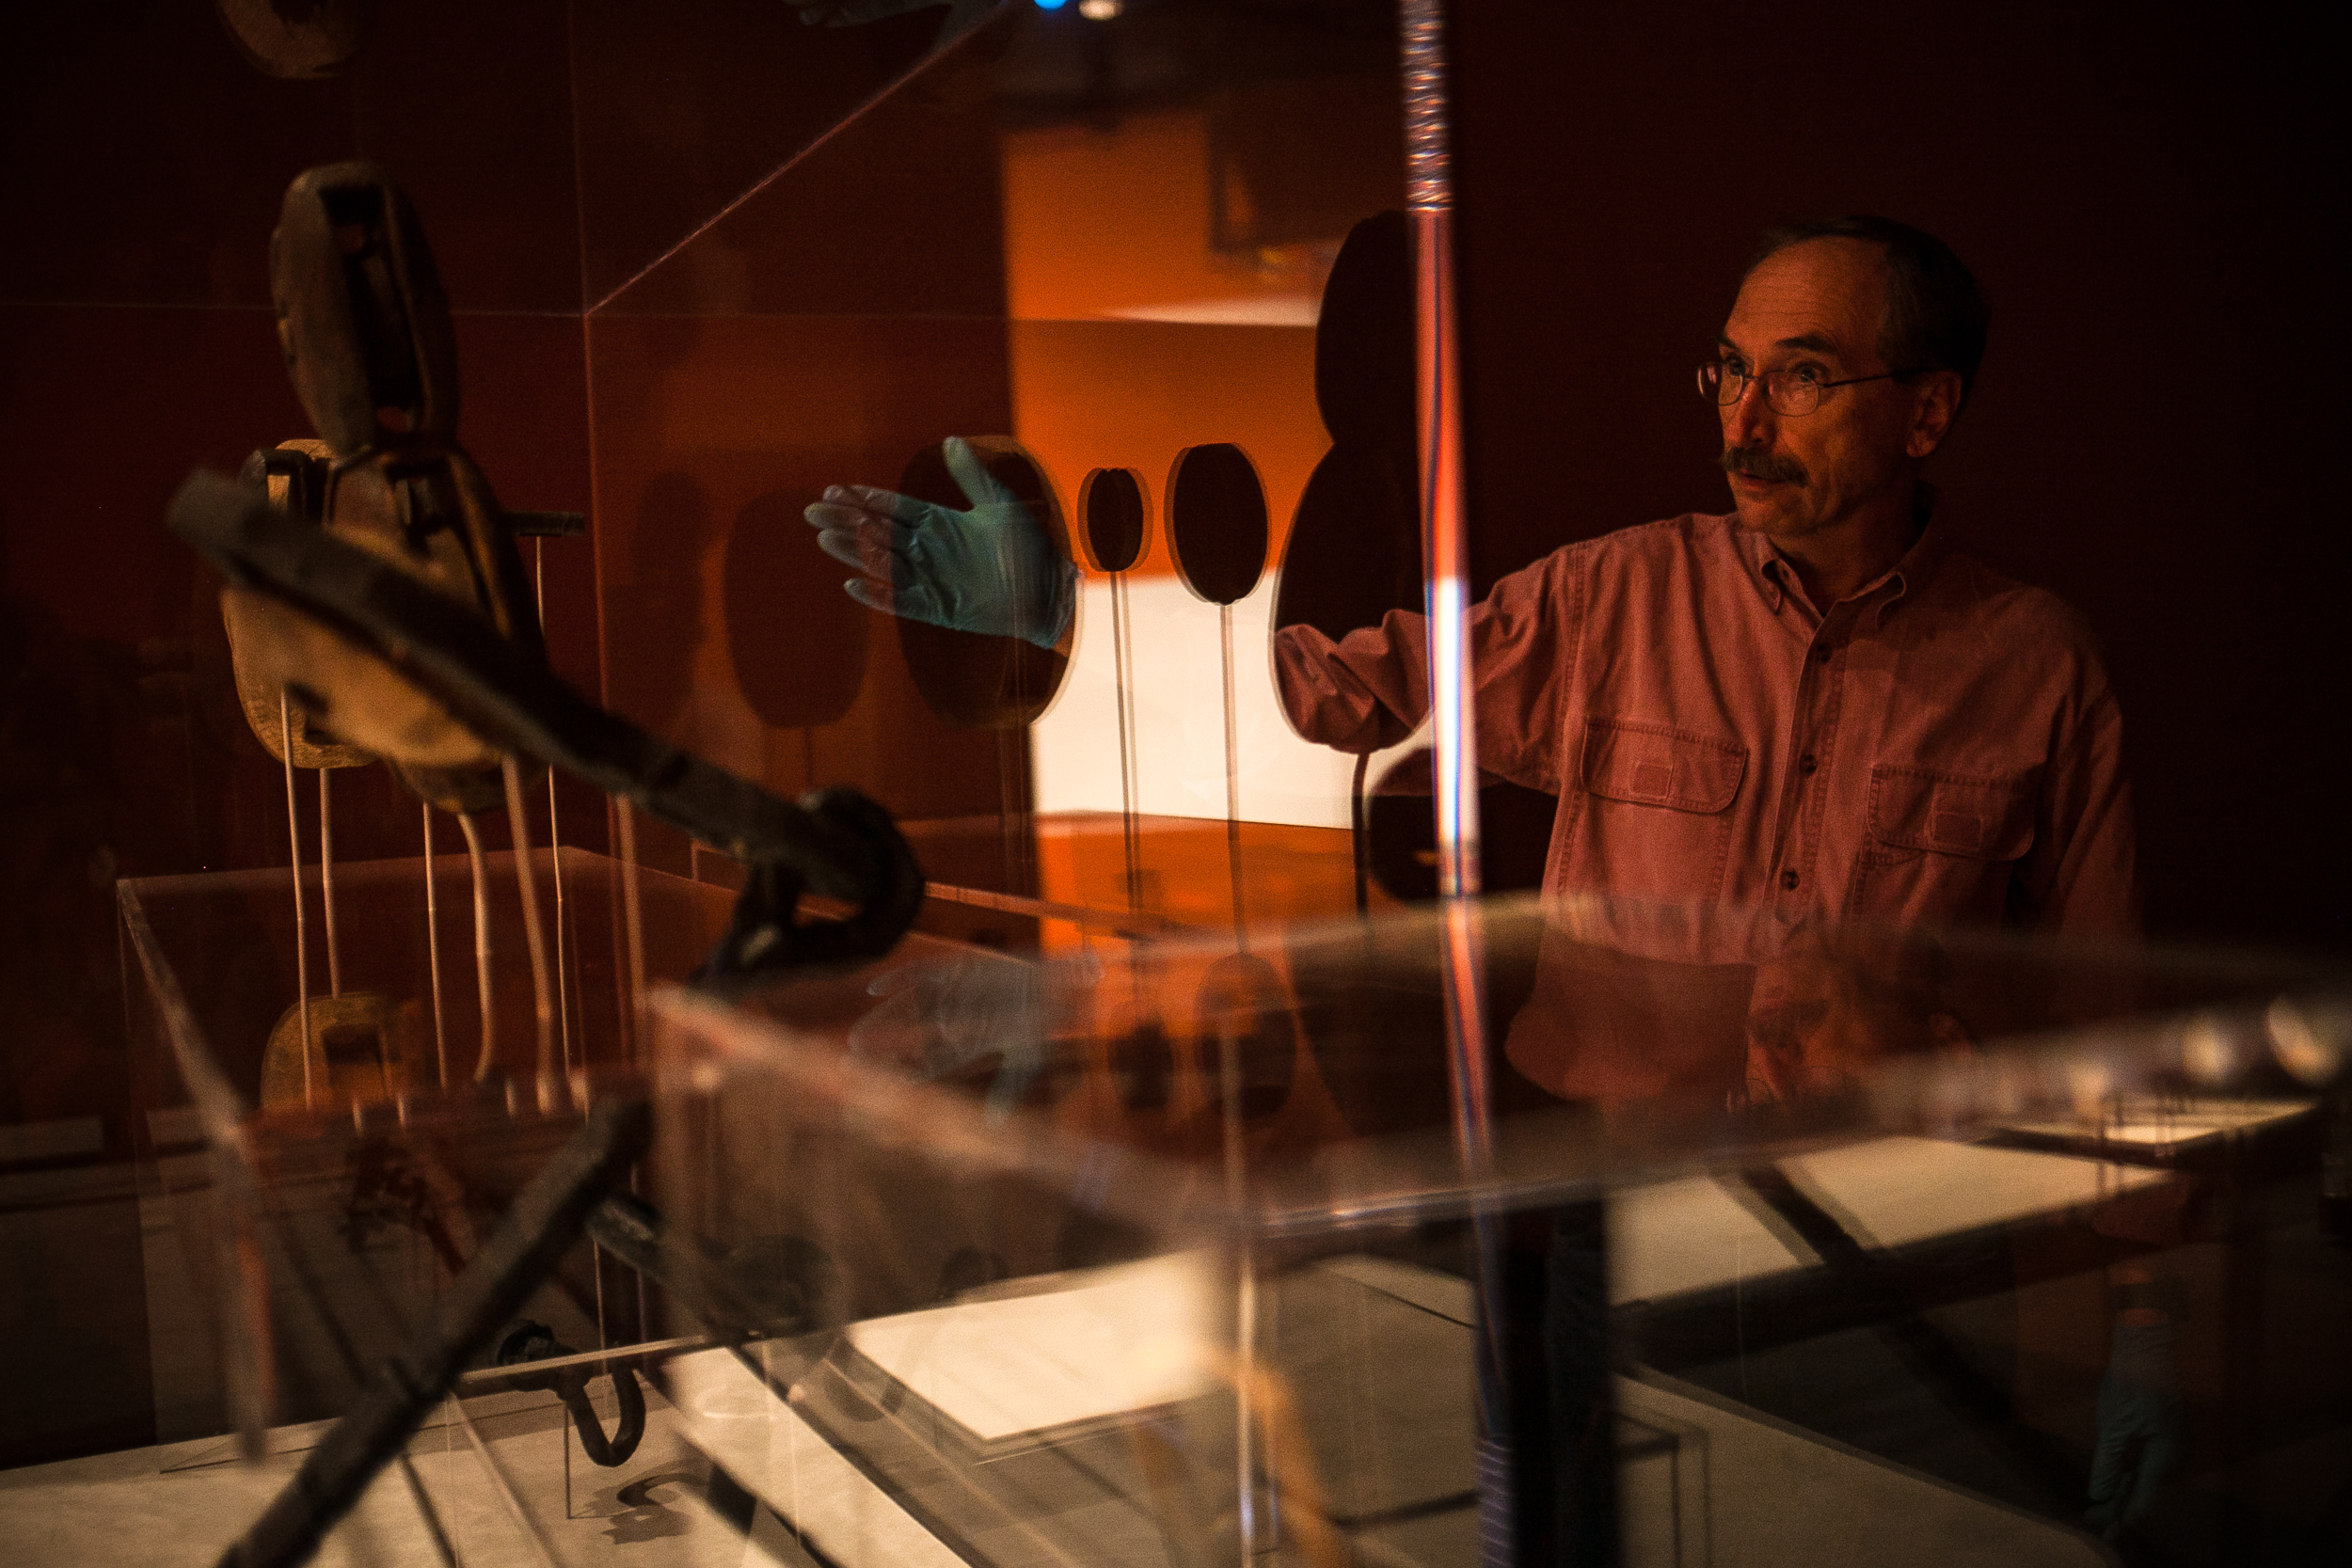 Dr. James Bruseth, guest curator at the Bullock Texas State History Museum, points out some of the tools recovered from the  La Belle that will be on display at the museum in Austin, TX., during a tour on October 15, 2014.